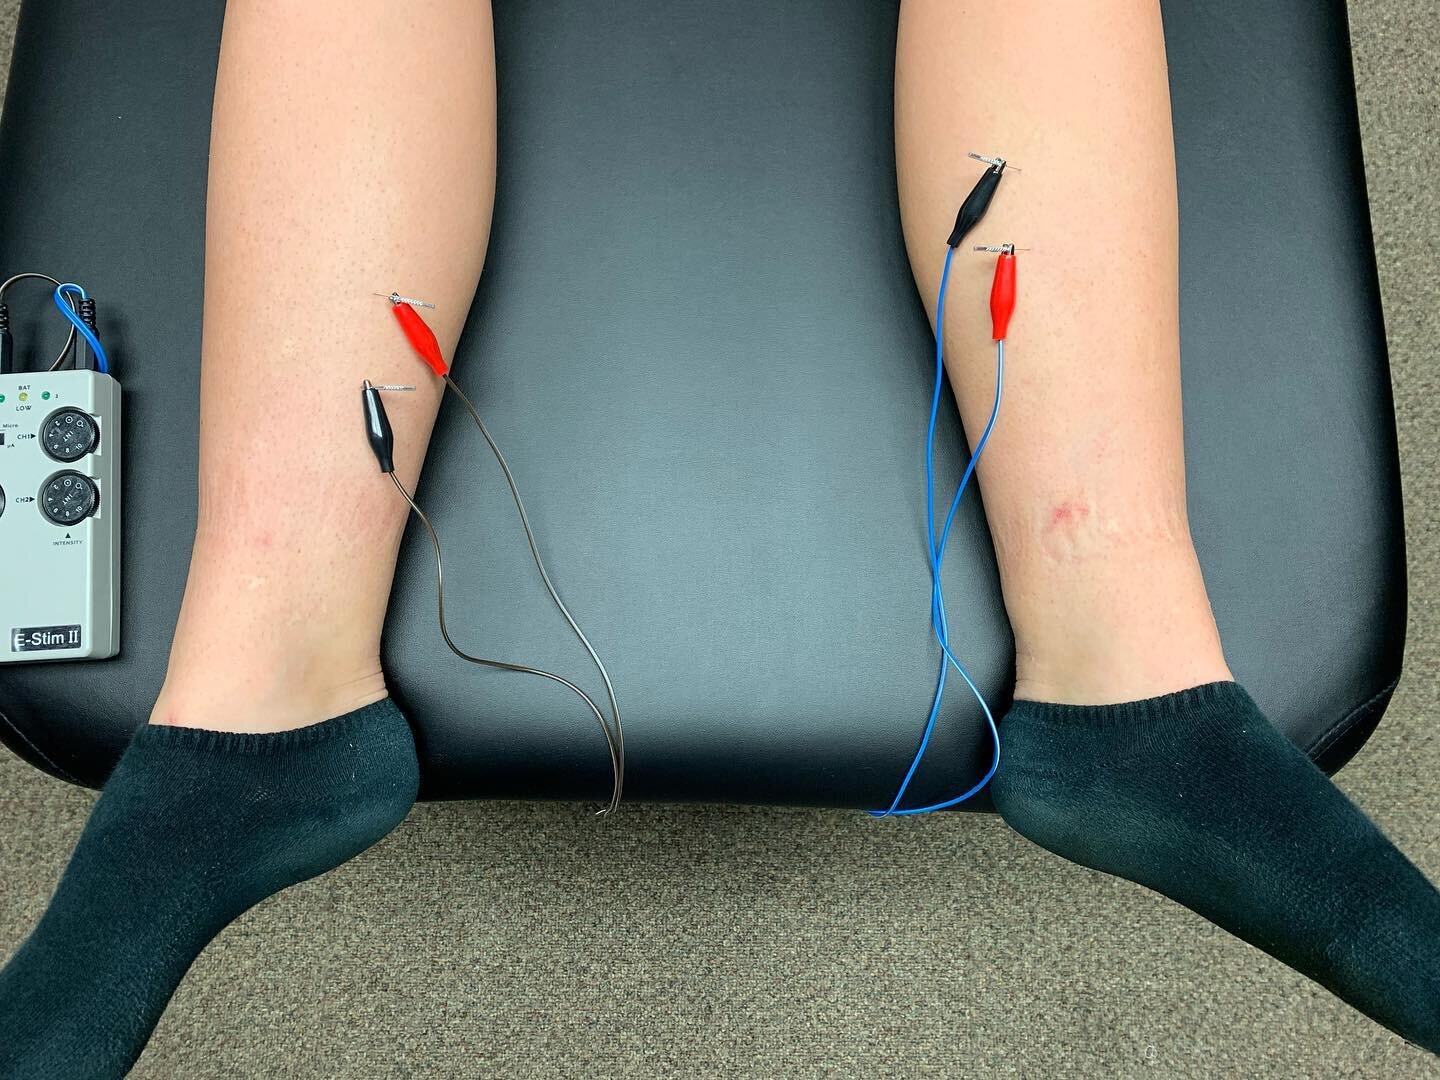 What to do about Shin Splints⁉️

There are two types of shin splints: 
1️⃣Anterior Shin Splints involving the the Anterior Tibialis Muscle 
2️⃣ Posterior Shin Splints invoking the Posterior Tibialis muscle 

Signs/Symptoms:
Sharp pain in the front or